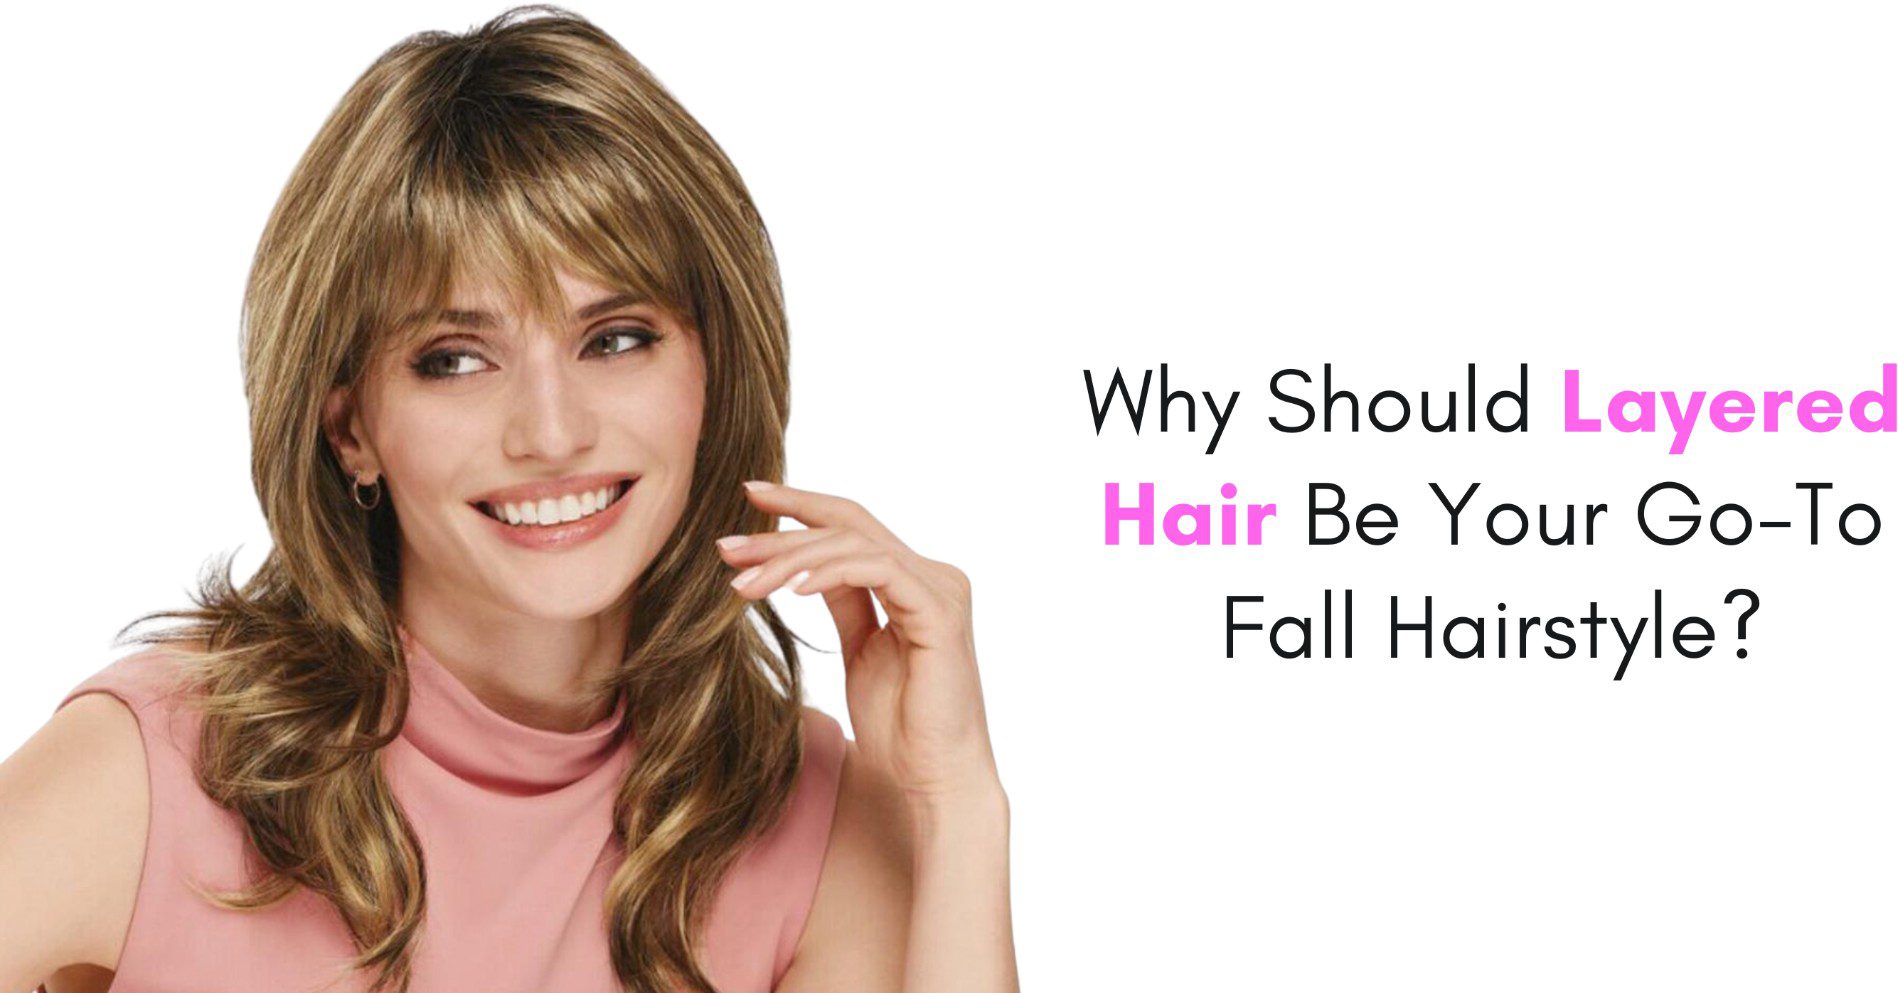 Why Should Layered Hair Be Your Go-To Fall Hairstyle?